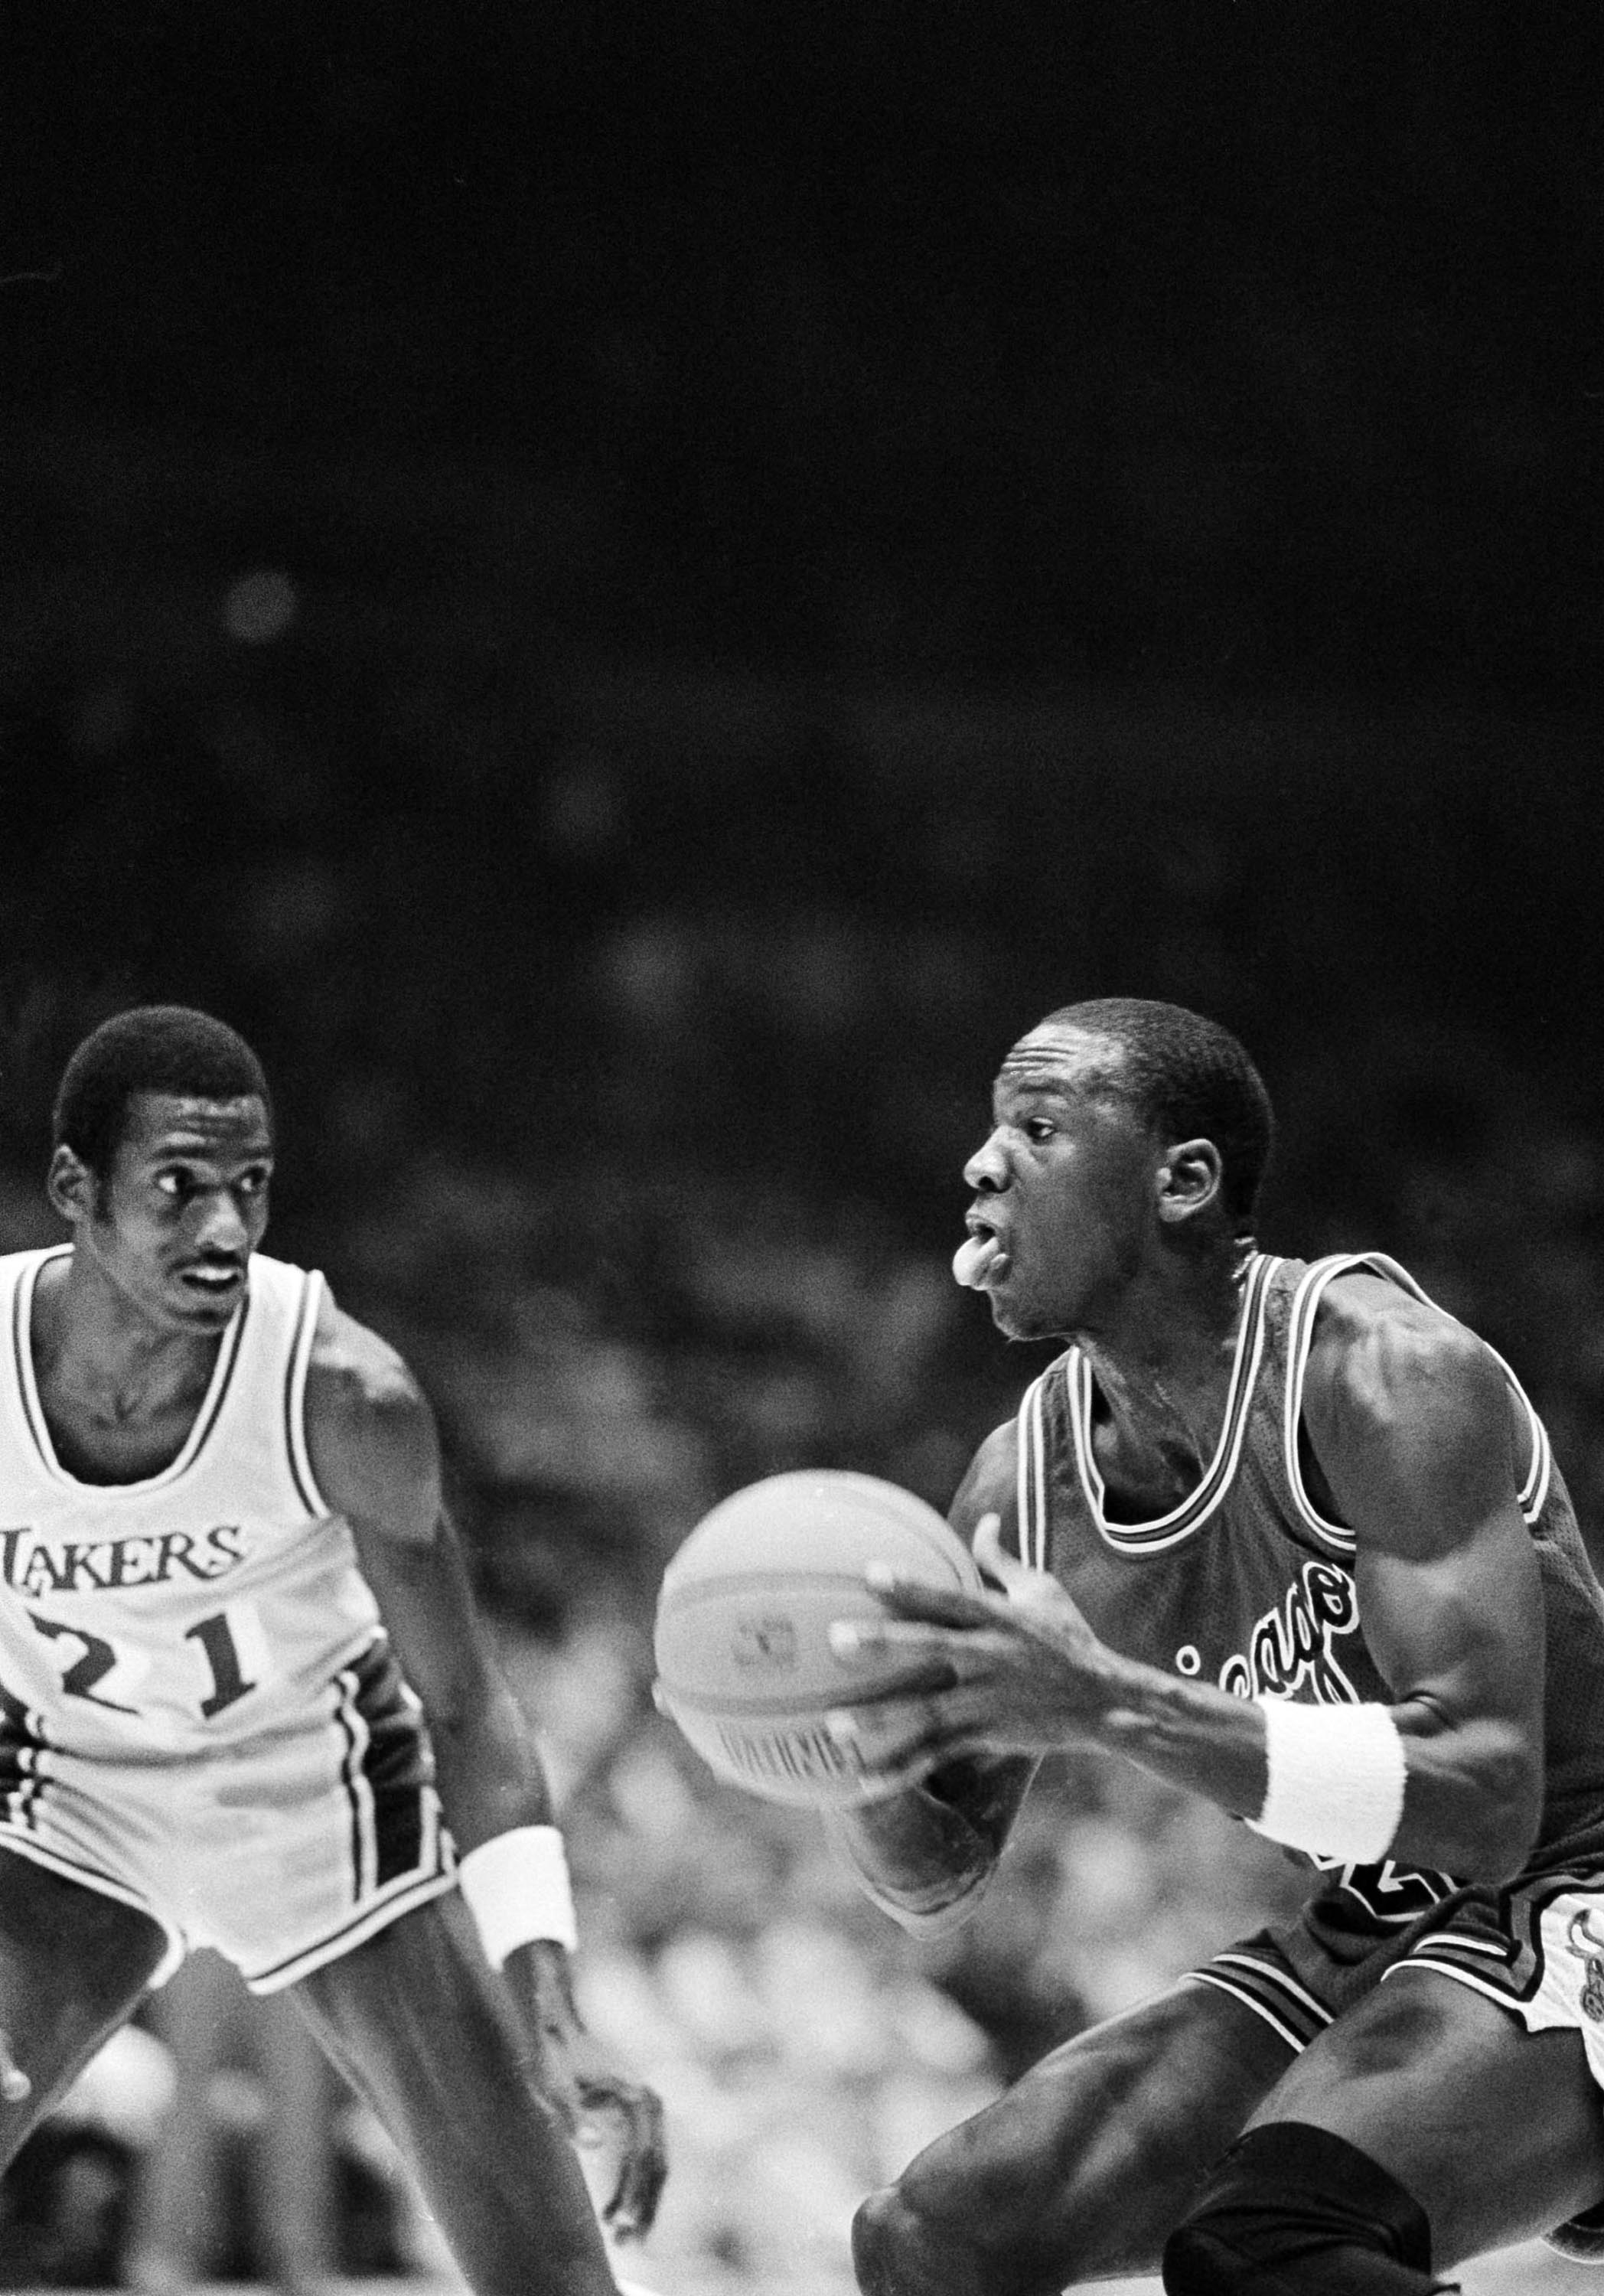 Chicago Bulls' Michael Jordan (23), right, prepares to go up with the ball as Los Angeles Lakers guard Michael Cooper (21), looks on during first half NBA action at the Forum in Inglewood, Calif., Dec. 2, 1984